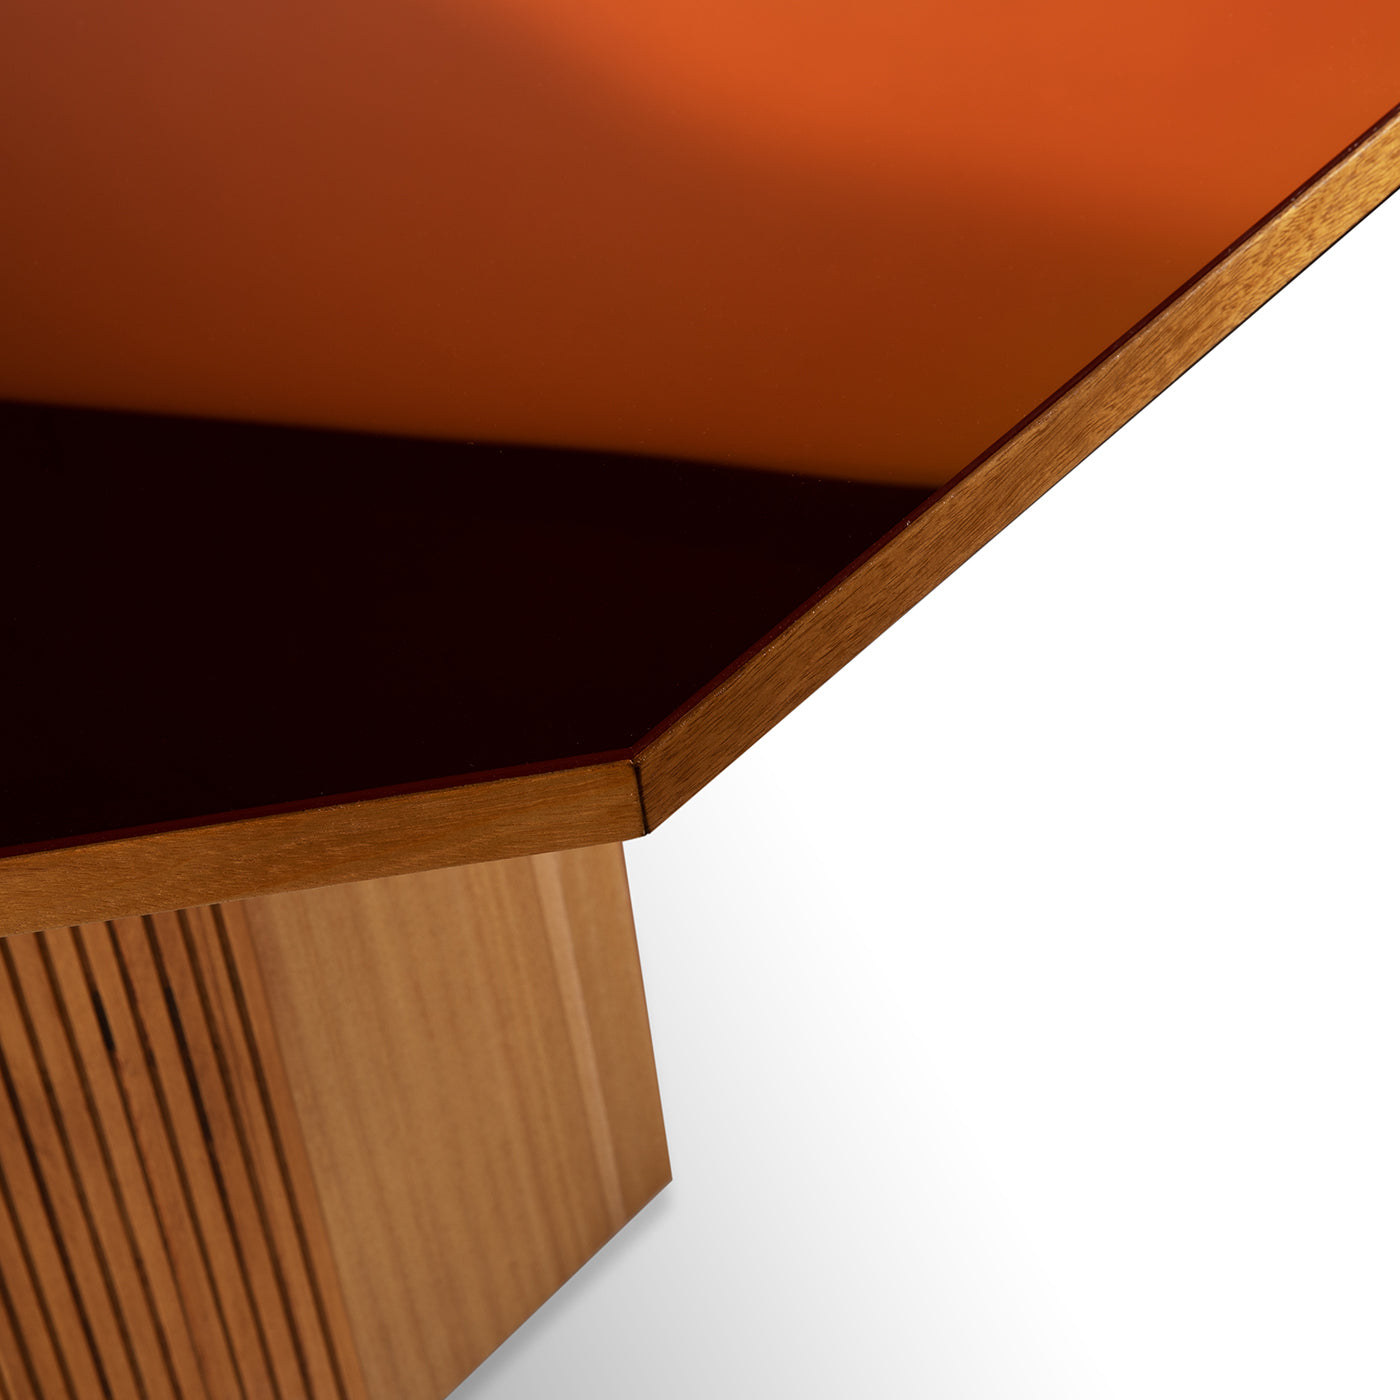 Gino 140 Glass and Wood Orange Dining Table - Alternative view 1